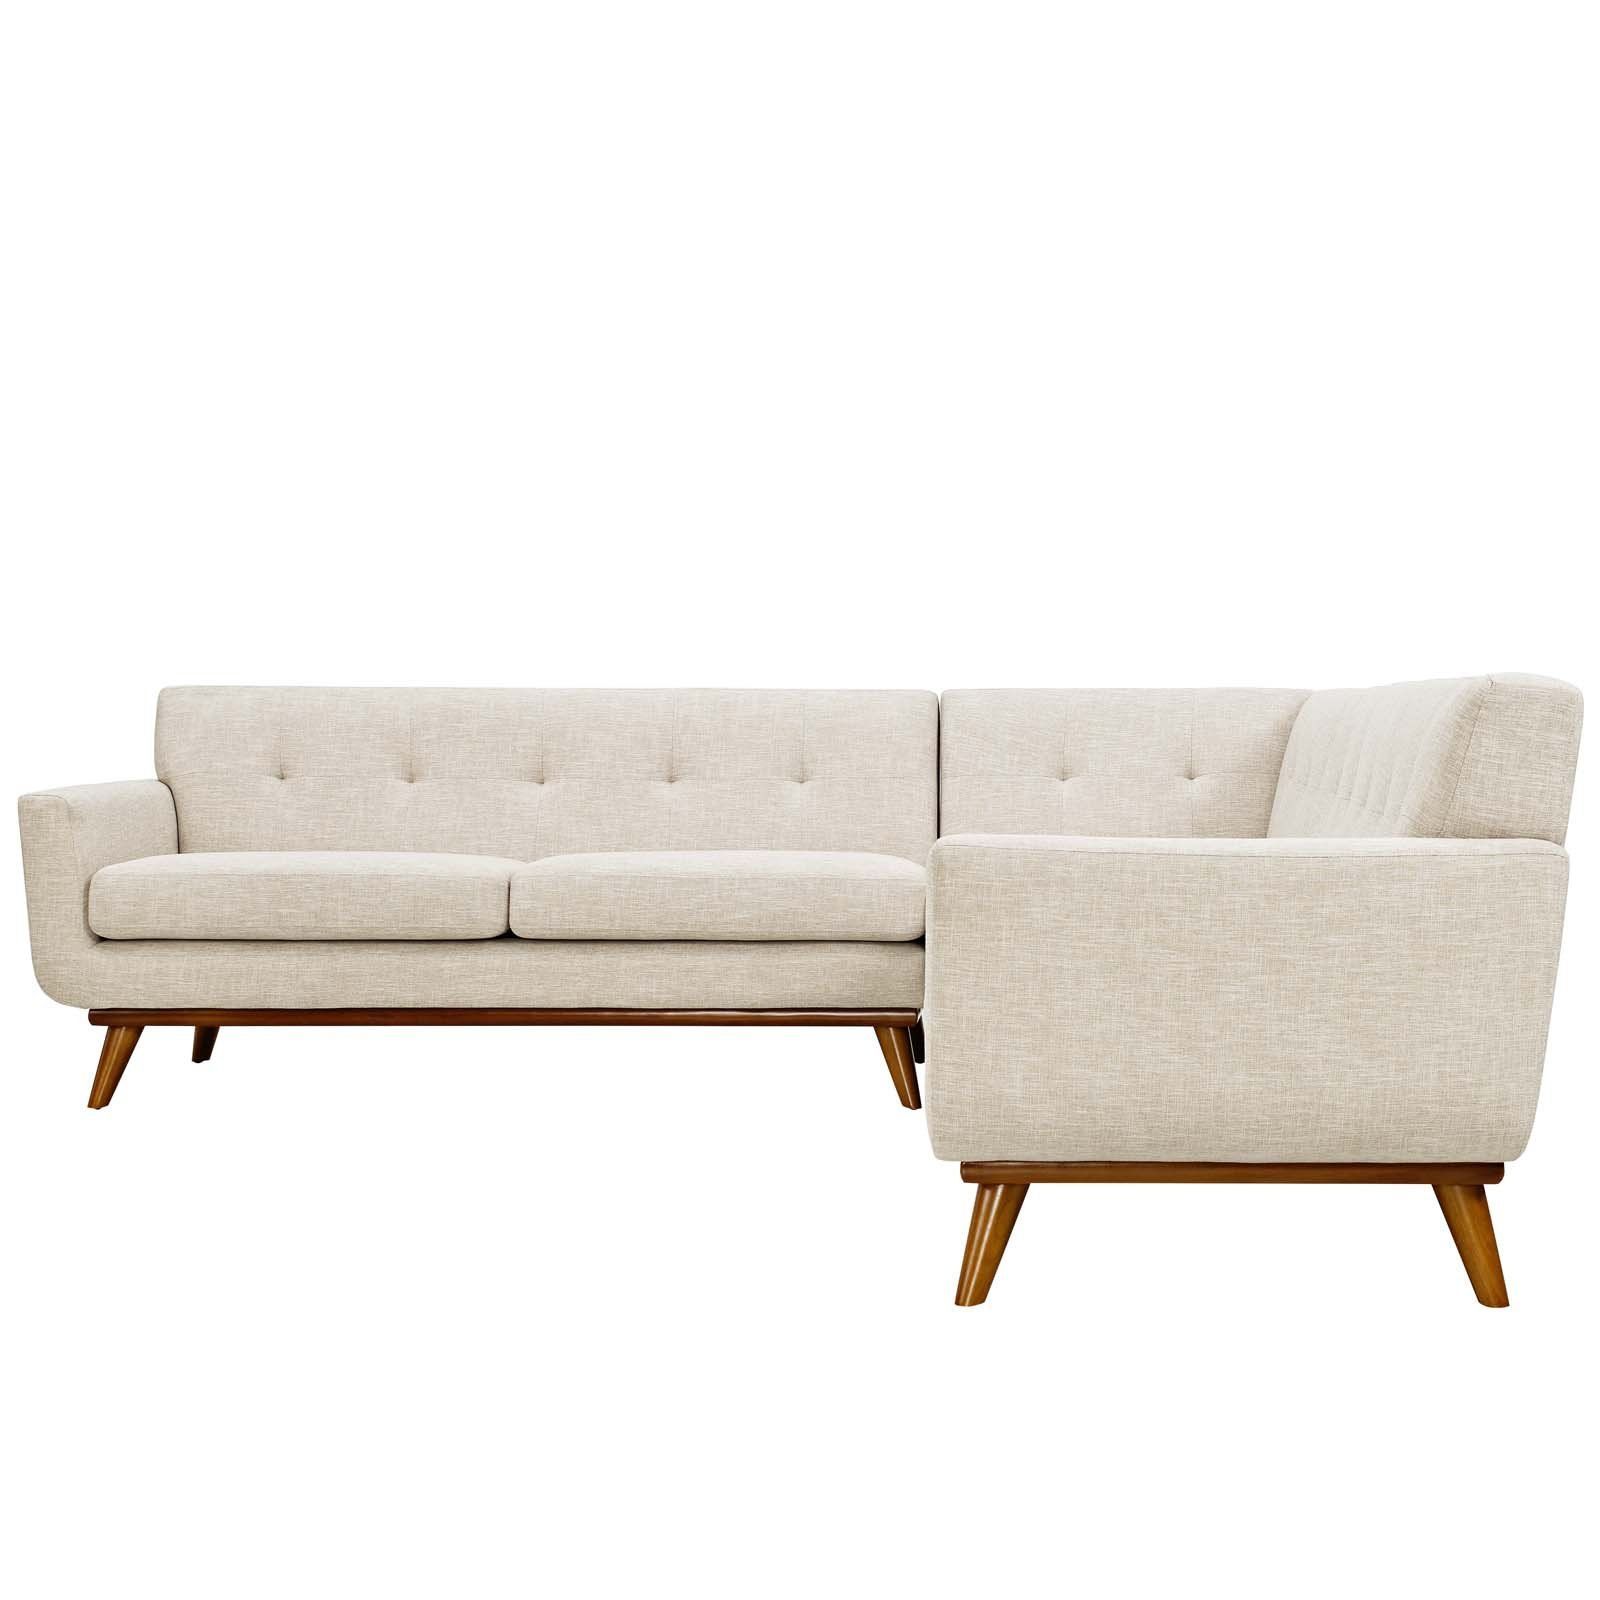 Engage L Shaped Sectional Sofa In Beige | Sectional Sofa Beige, Fabric Throughout Beige L Shaped Sectional Sofas (View 20 of 20)